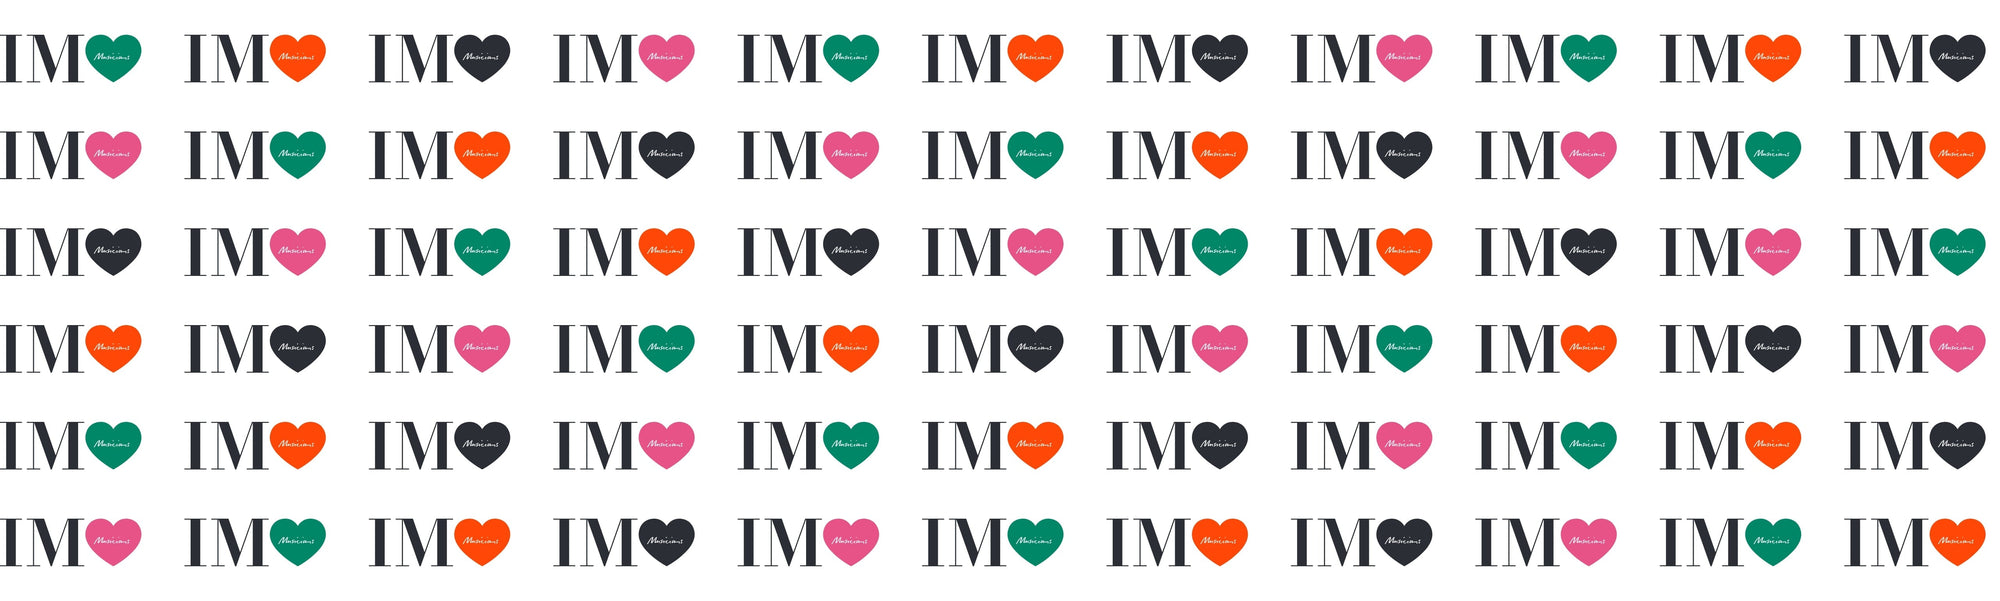 Isaac Mizrahi "IM" logo with a heart next to it with "musicians" inside the heart repeated over and over and over again 